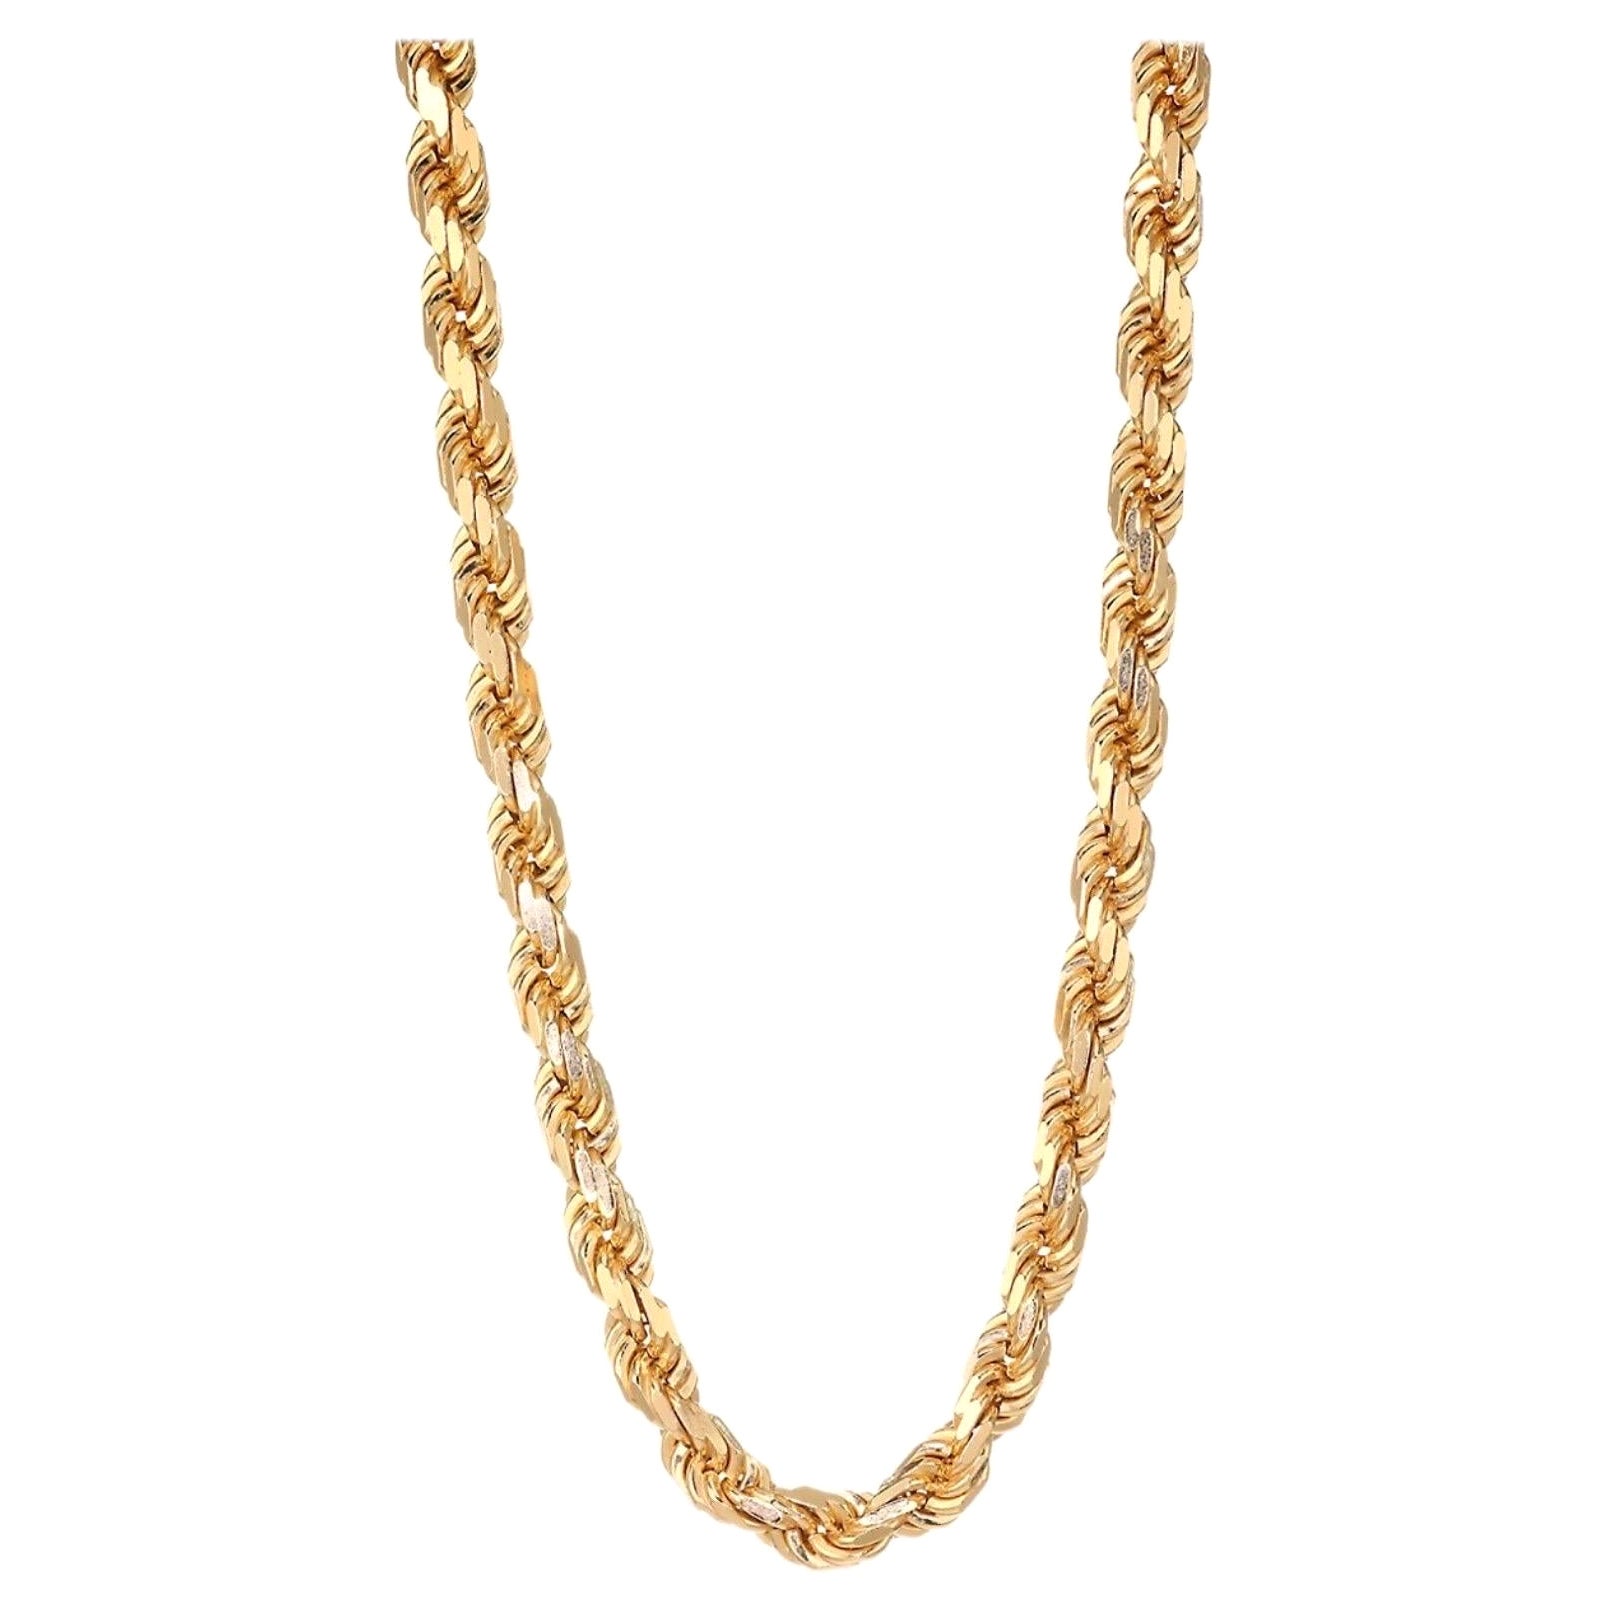 Vintage 14 Karat Yellow Gold 20.5 Gm, Rope Chain Necklace